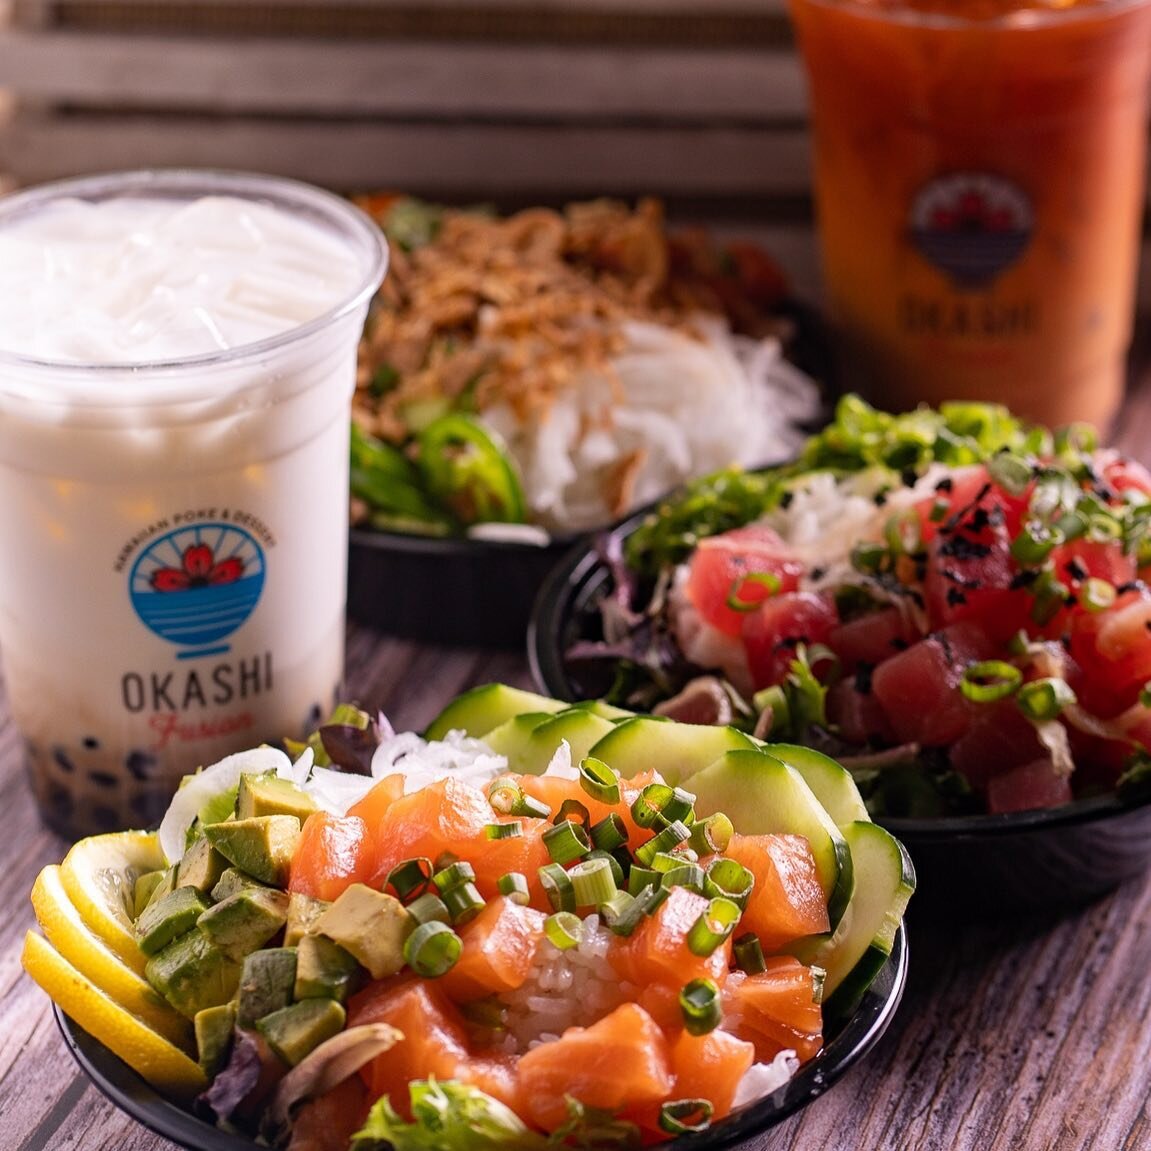 The perfect meal: healthy yet fulfilling poke bowl with a refreshing boba drink! 🤤
.
.
Create the perfect lunch or dinner that is specific to your liking! Choose from a variety of toppings and sauces 😋 
.
.
Premium quality, fresh seafood and veggie